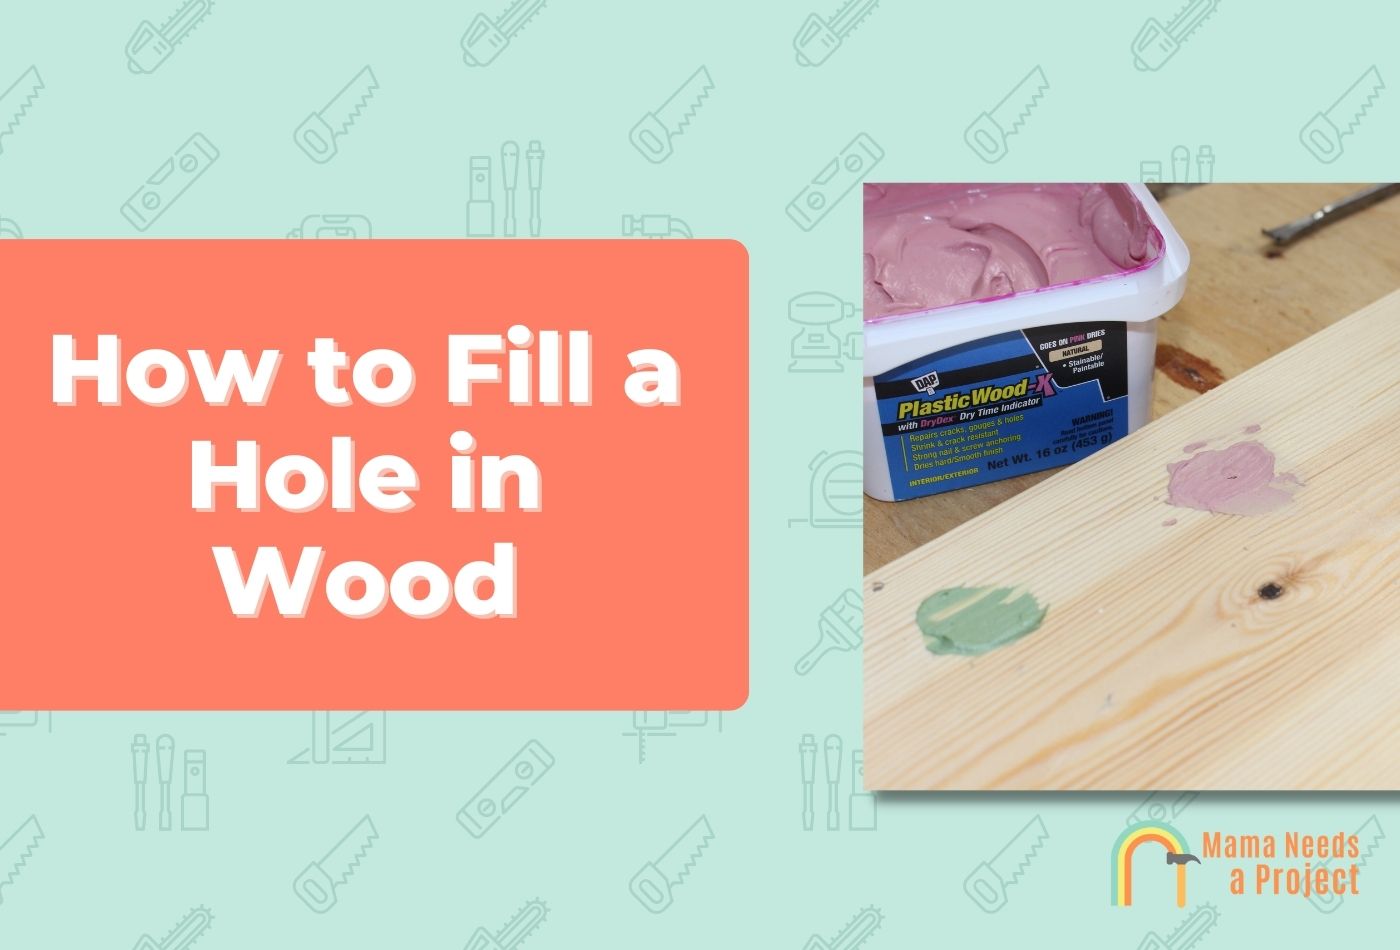 How to Fill a Hole in Wood